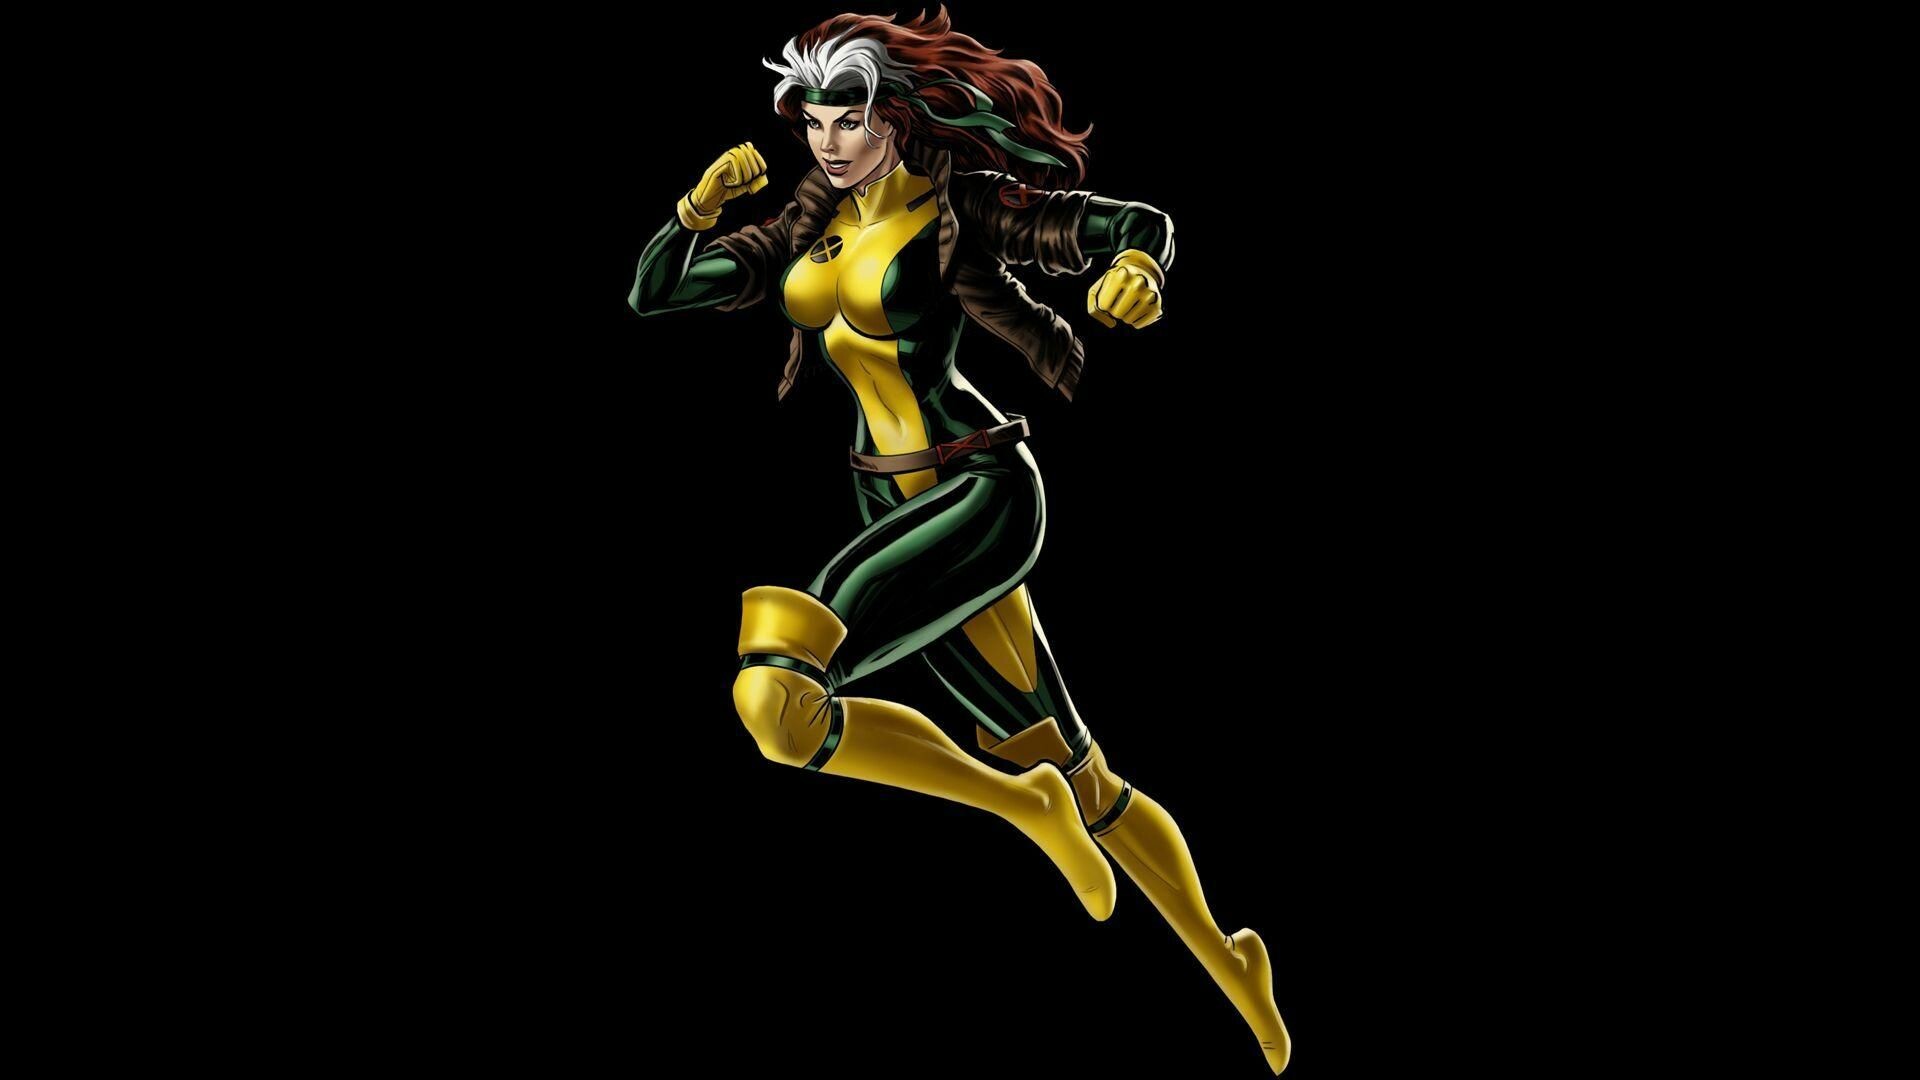 Rogue (Marvel): Her mutant ability requires skin-to-skin contact to absorb powers, physical talents, and strength. 1920x1080 Full HD Wallpaper.